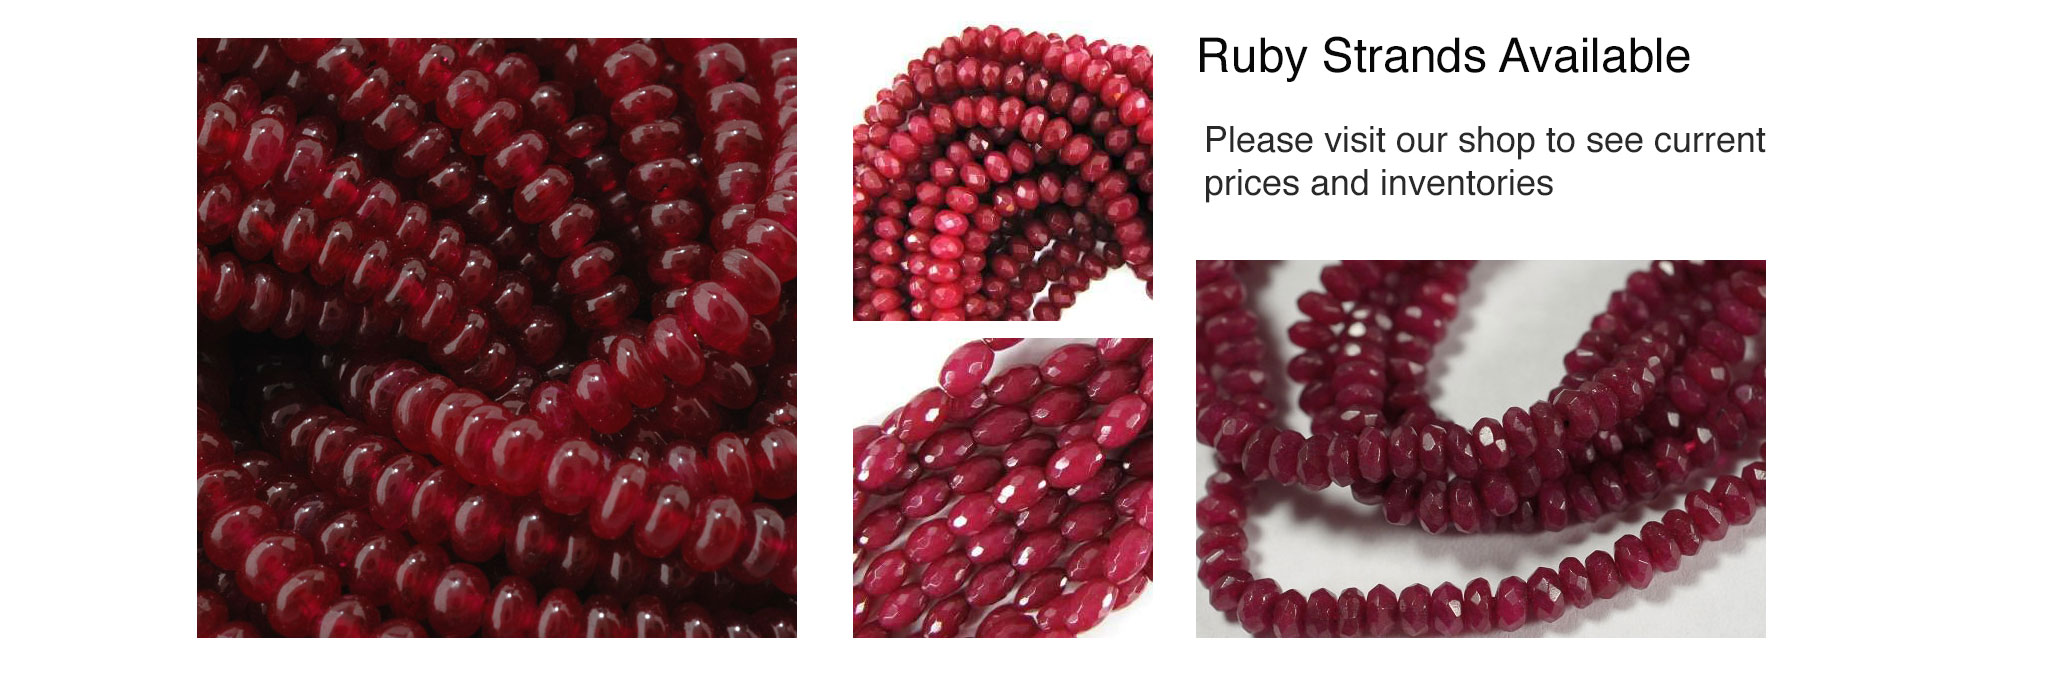 Ruby Strands Now Available!